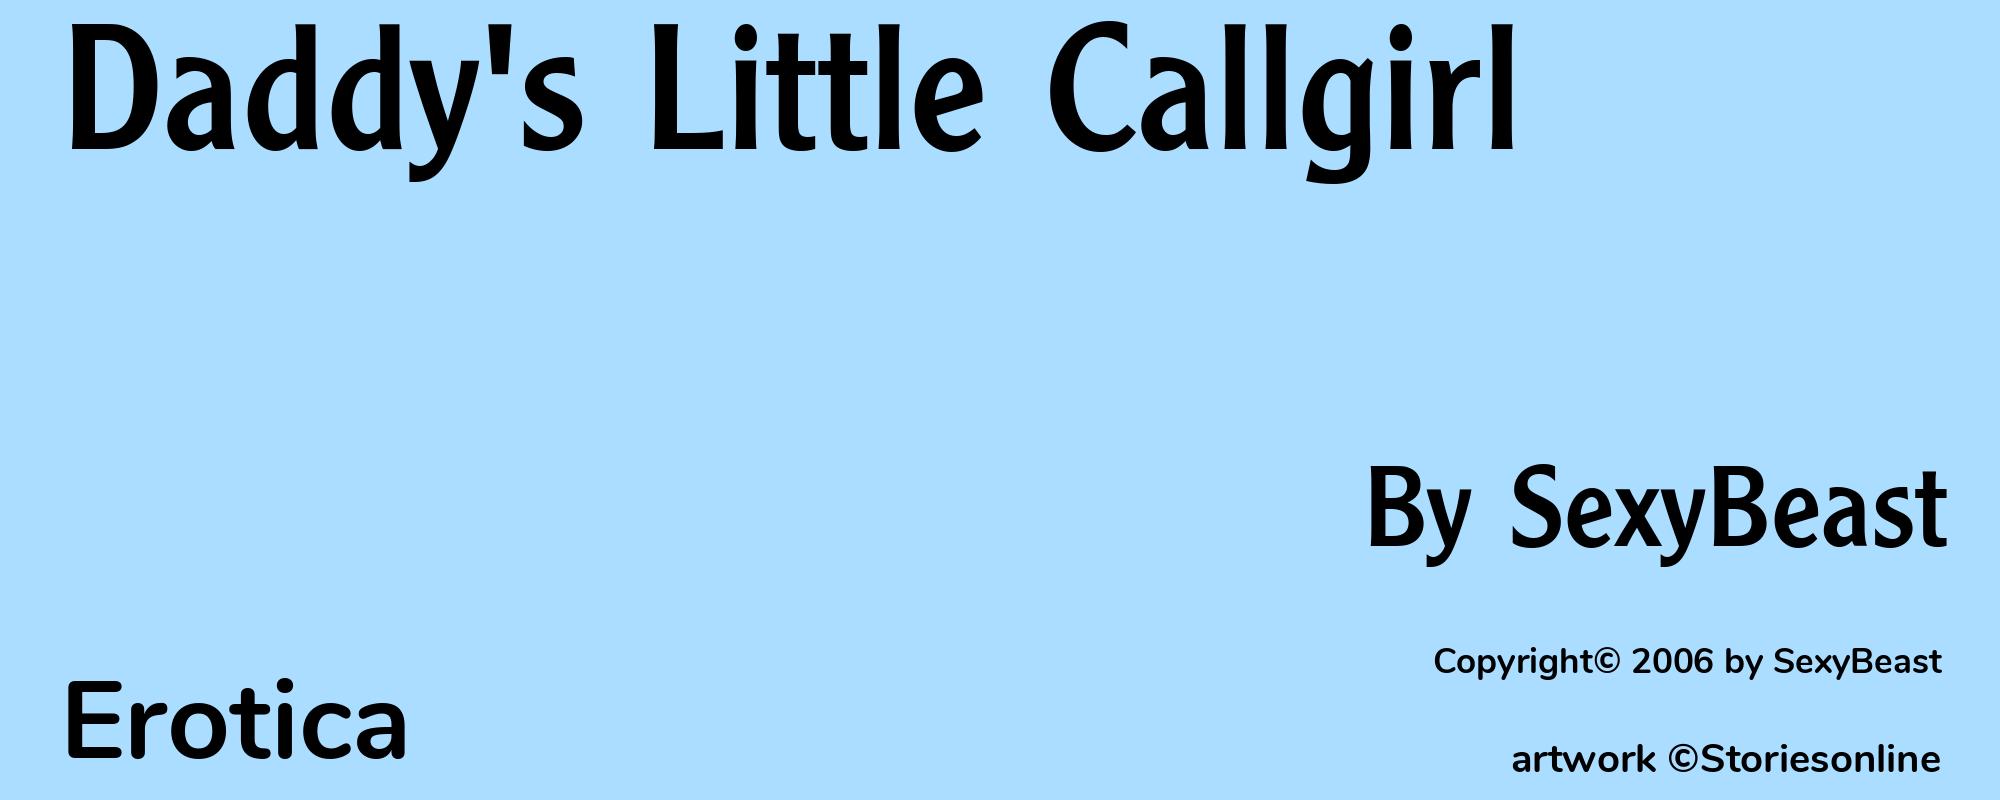 Daddy's Little Callgirl - Cover